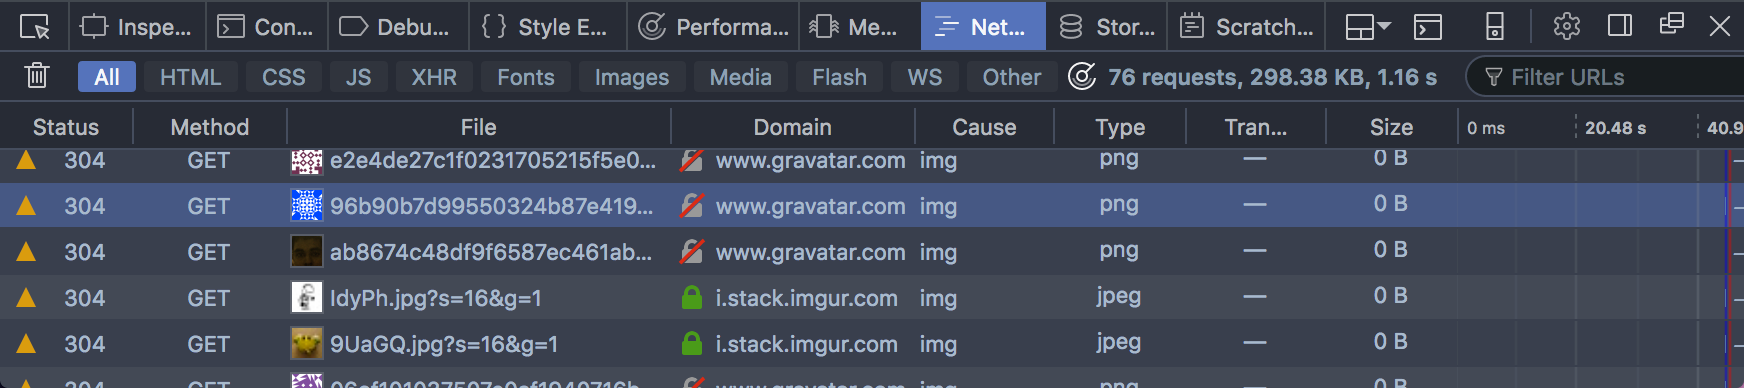 Firefox Network Inspector showing insecure requests to
www.gravatar.com